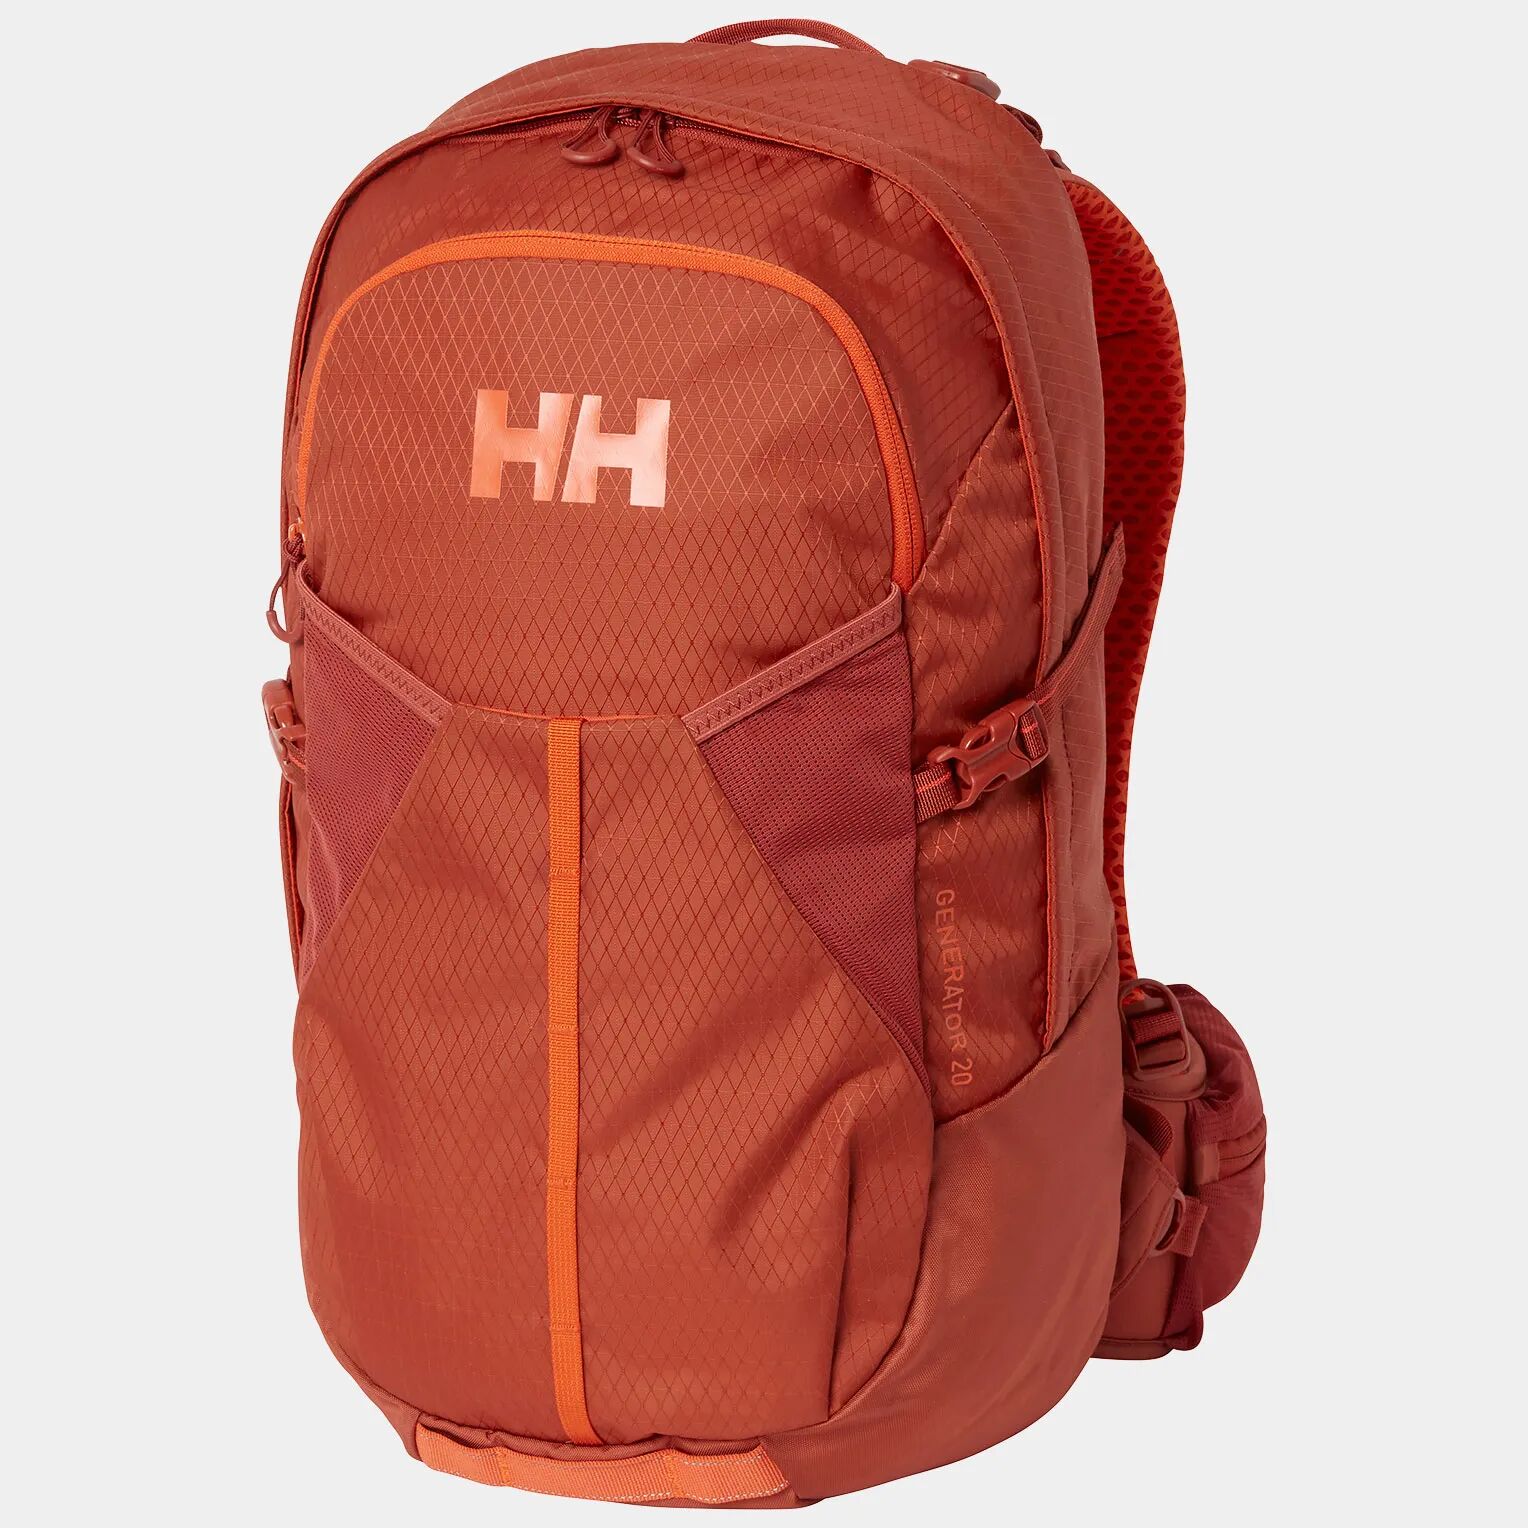 Helly Hansen Unisex Generator 20L Backpack Red STD - Deep Canyon Red - Unisex